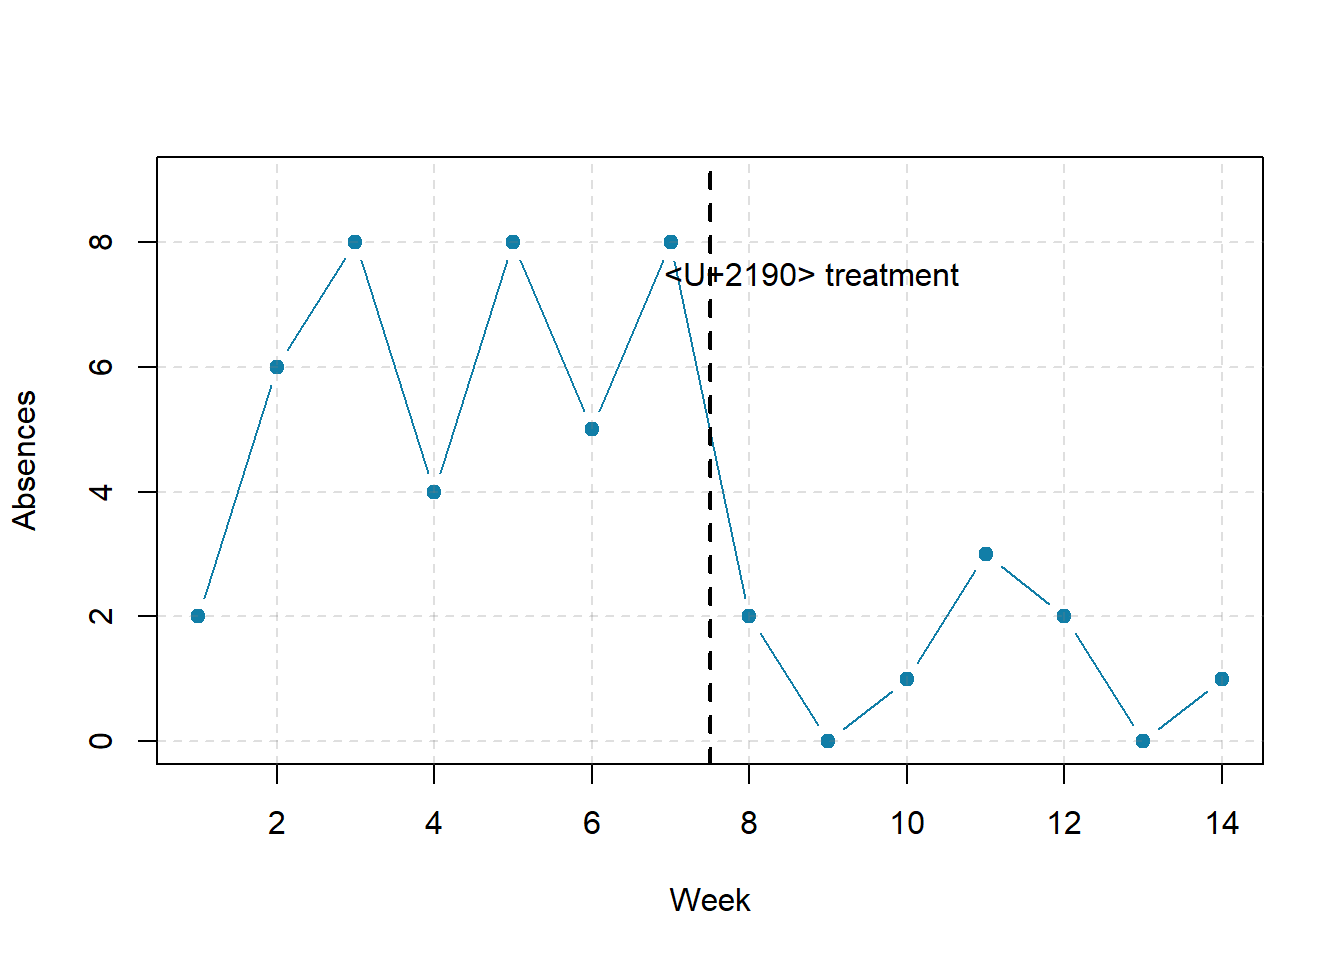 Two line graphs. The x-axes on both are labeled Week and range from 0 to 14. The y-axes on both are labeled Absences and range from 0 to 8. Between weeks 7 and 8 a vertical dotted line indicates when a treatment was introduced. Both graphs show generally high levels of absences from weeks 1 through 7 (before the treatment) and only 2 absences in week 8 (the first observation after the treatment). The top graph shows the absence level staying low from weeks 9 to 14. The bottom graph shows the absence level for weeks 9 to 15 bouncing around at the same high levels as before the treatment.